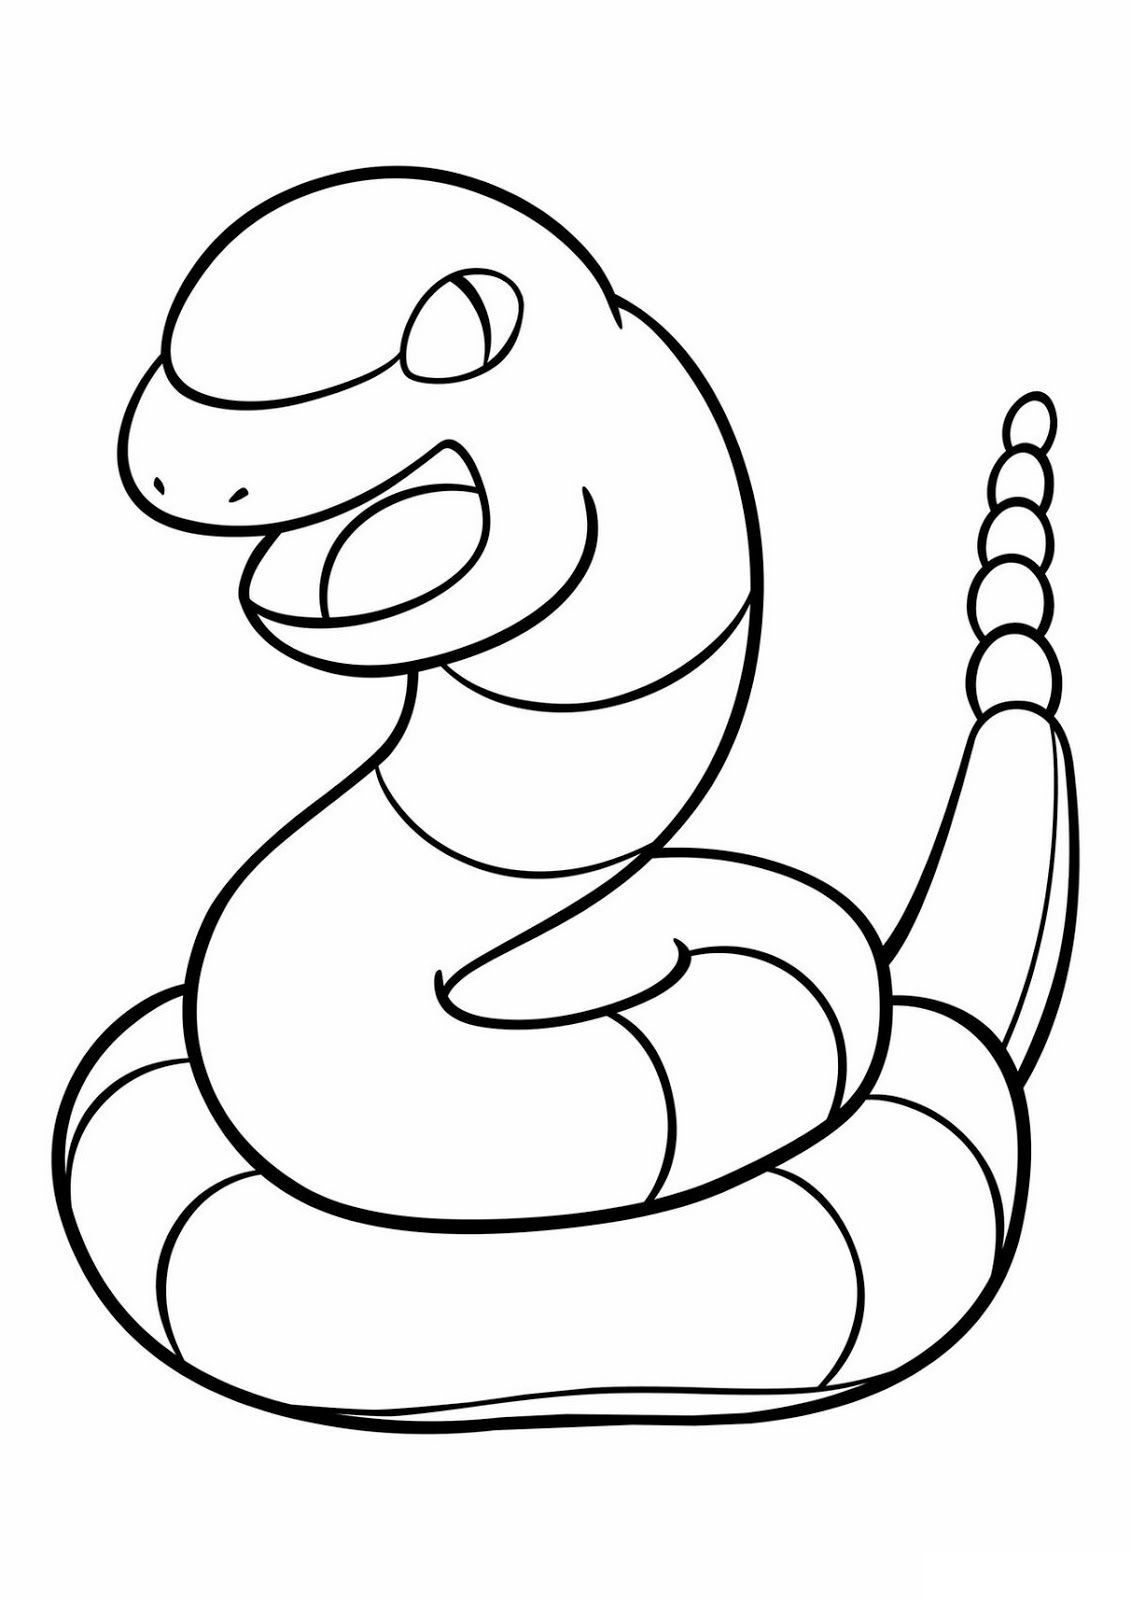 Playful Ekans Coloring Pages for Kids